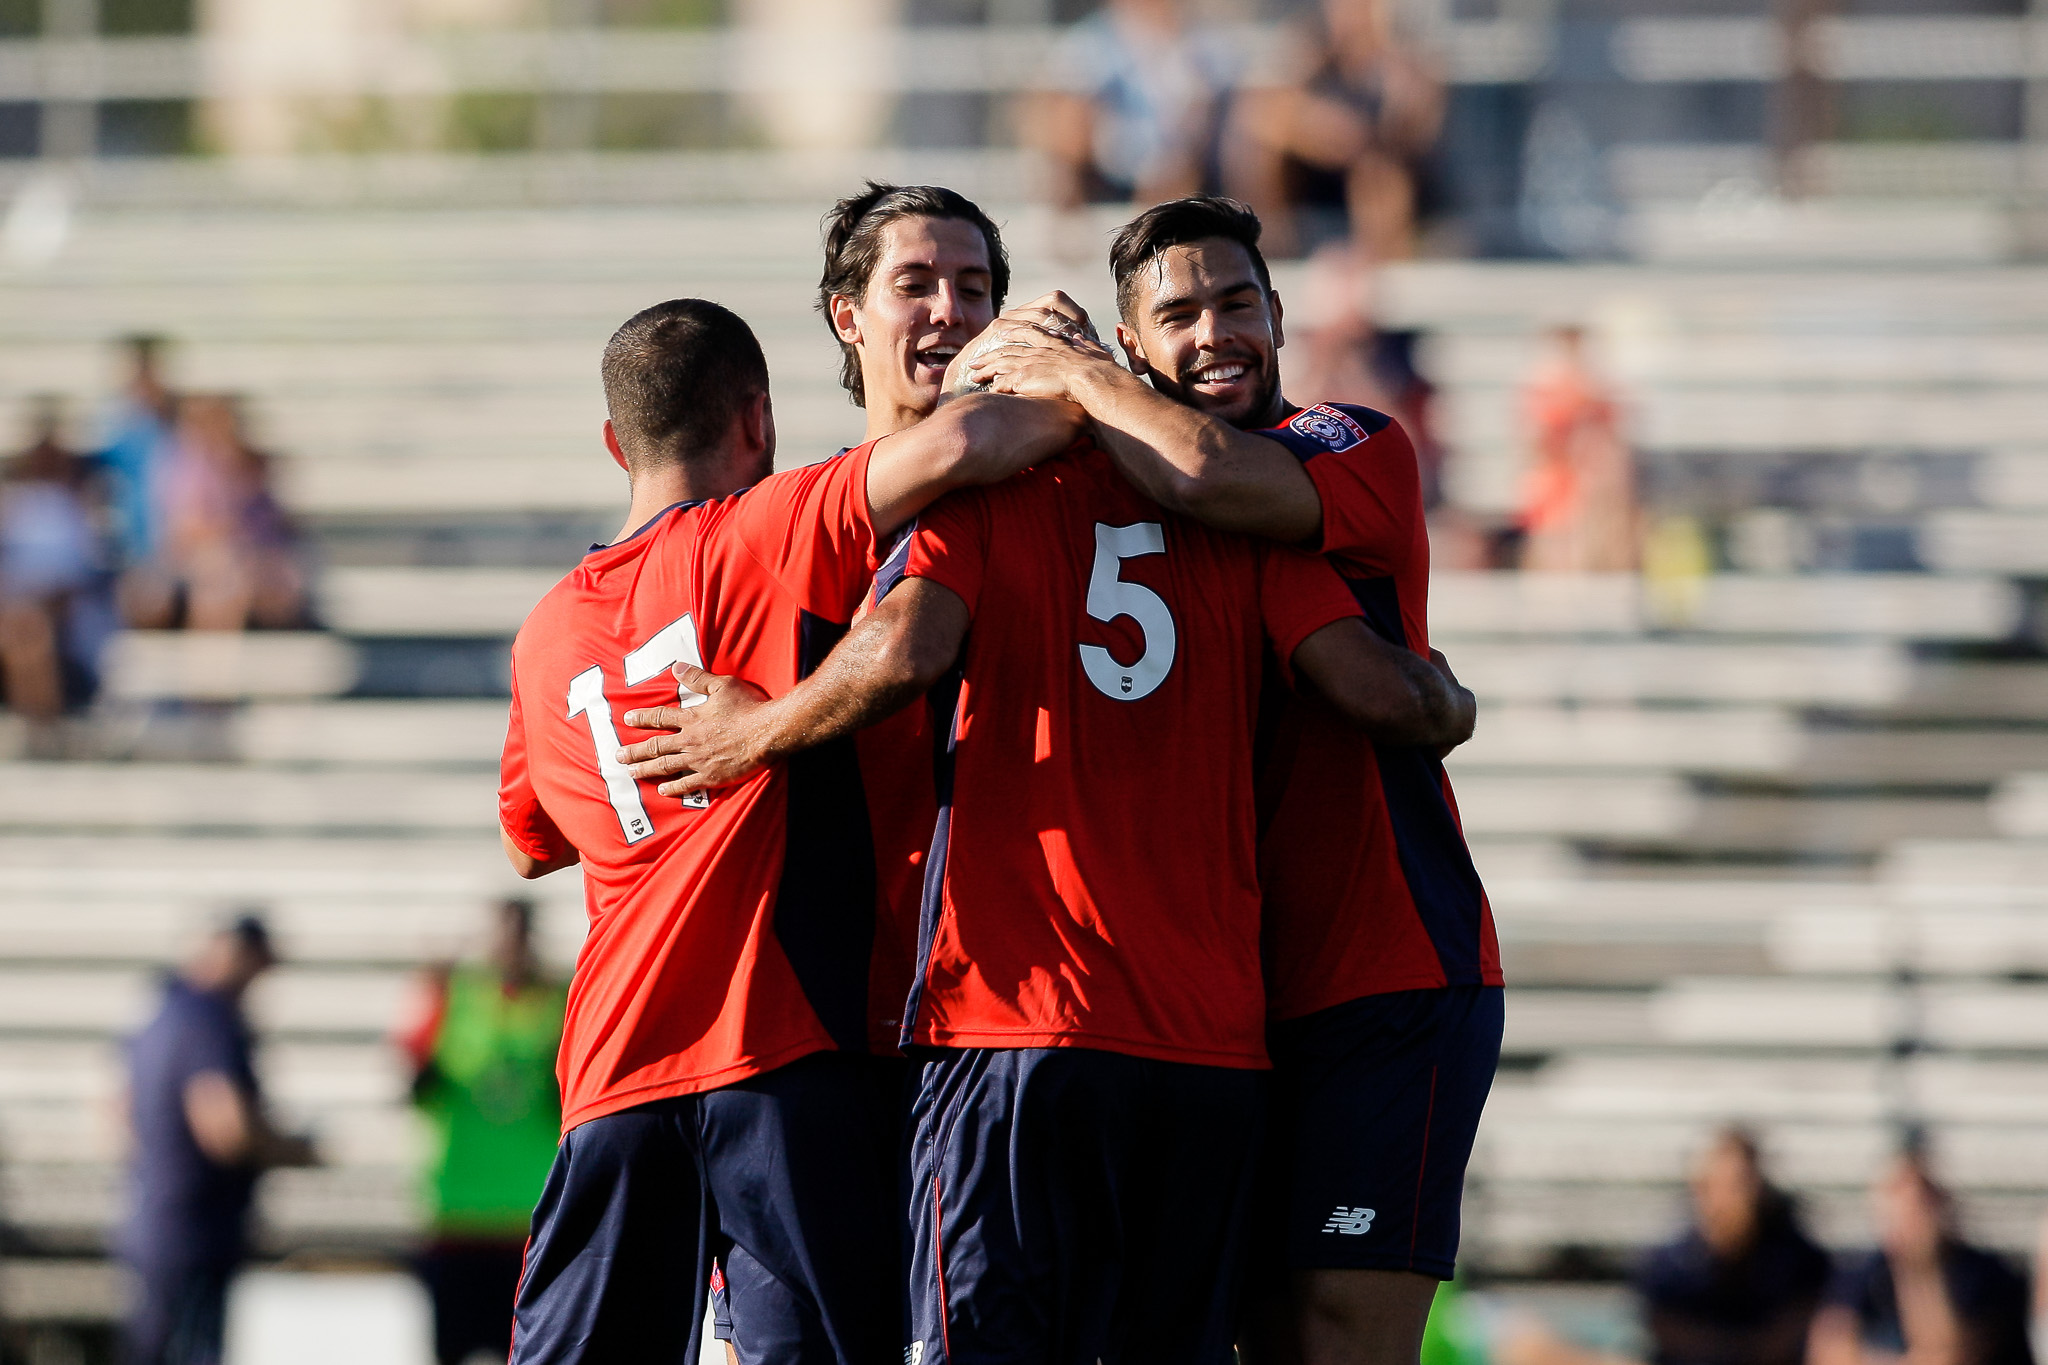  Boston City FC players mob Pedro Silva, #5, after he scores to even the game at 1-1. (c) Burt Granofsky 